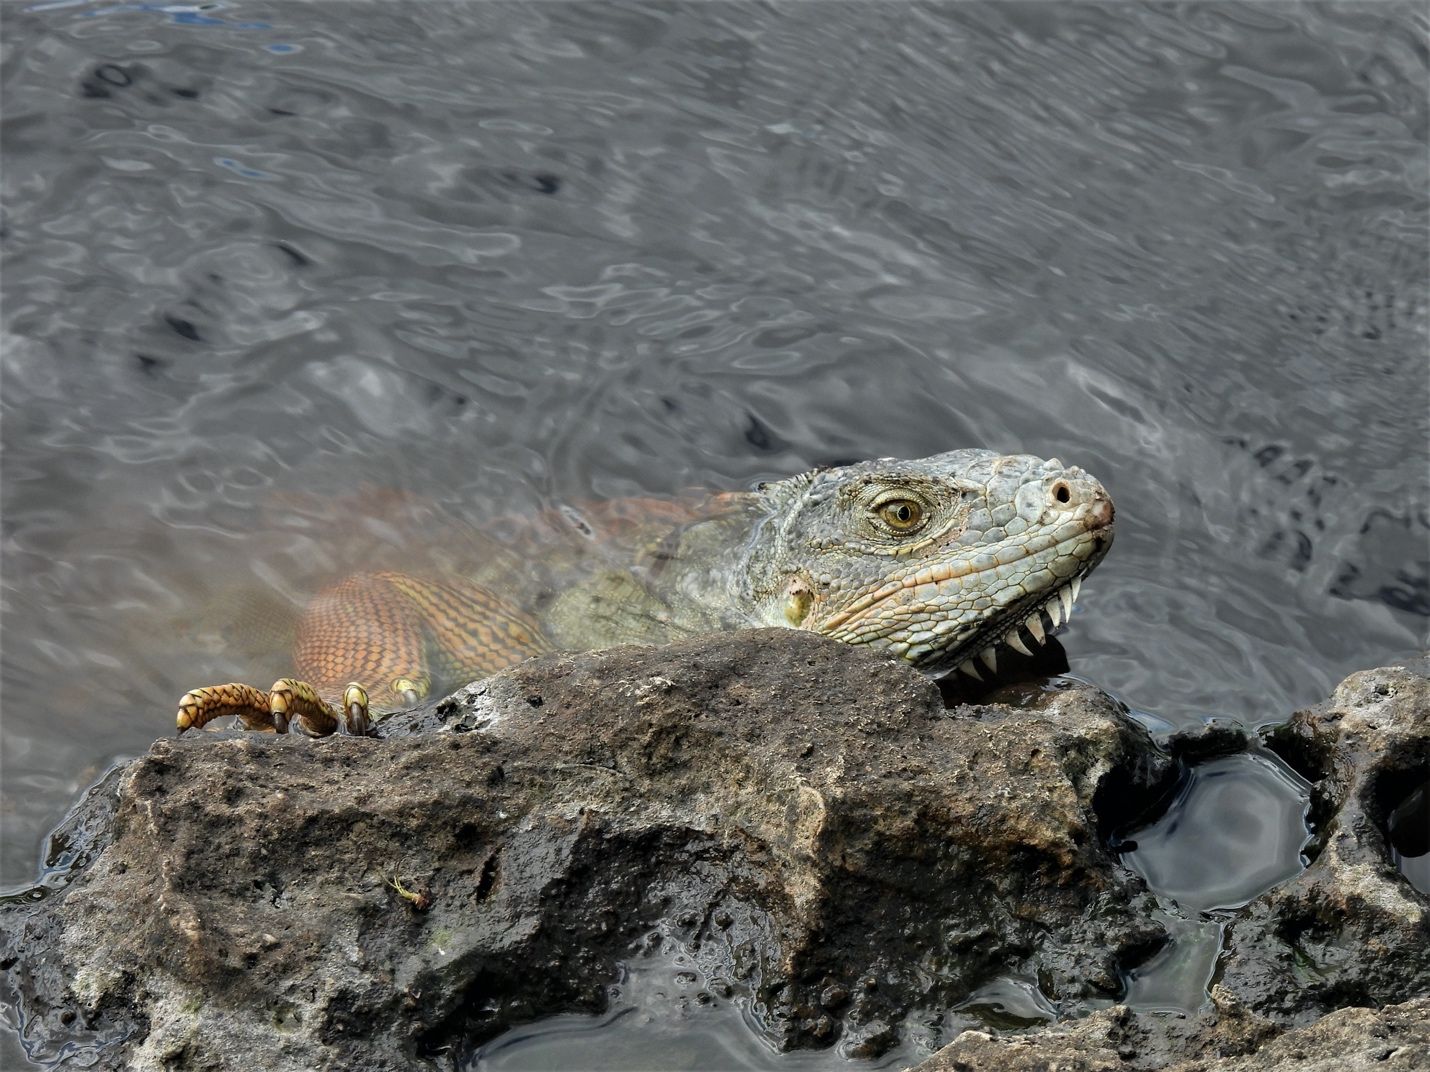 Green iguanas (Iguana iguana) are excellent swimmers and are usually found near water. When they feel threatened, they are quick to dive into water, even from high in a tree, and only crawl back onto land when it is safe to do so. 